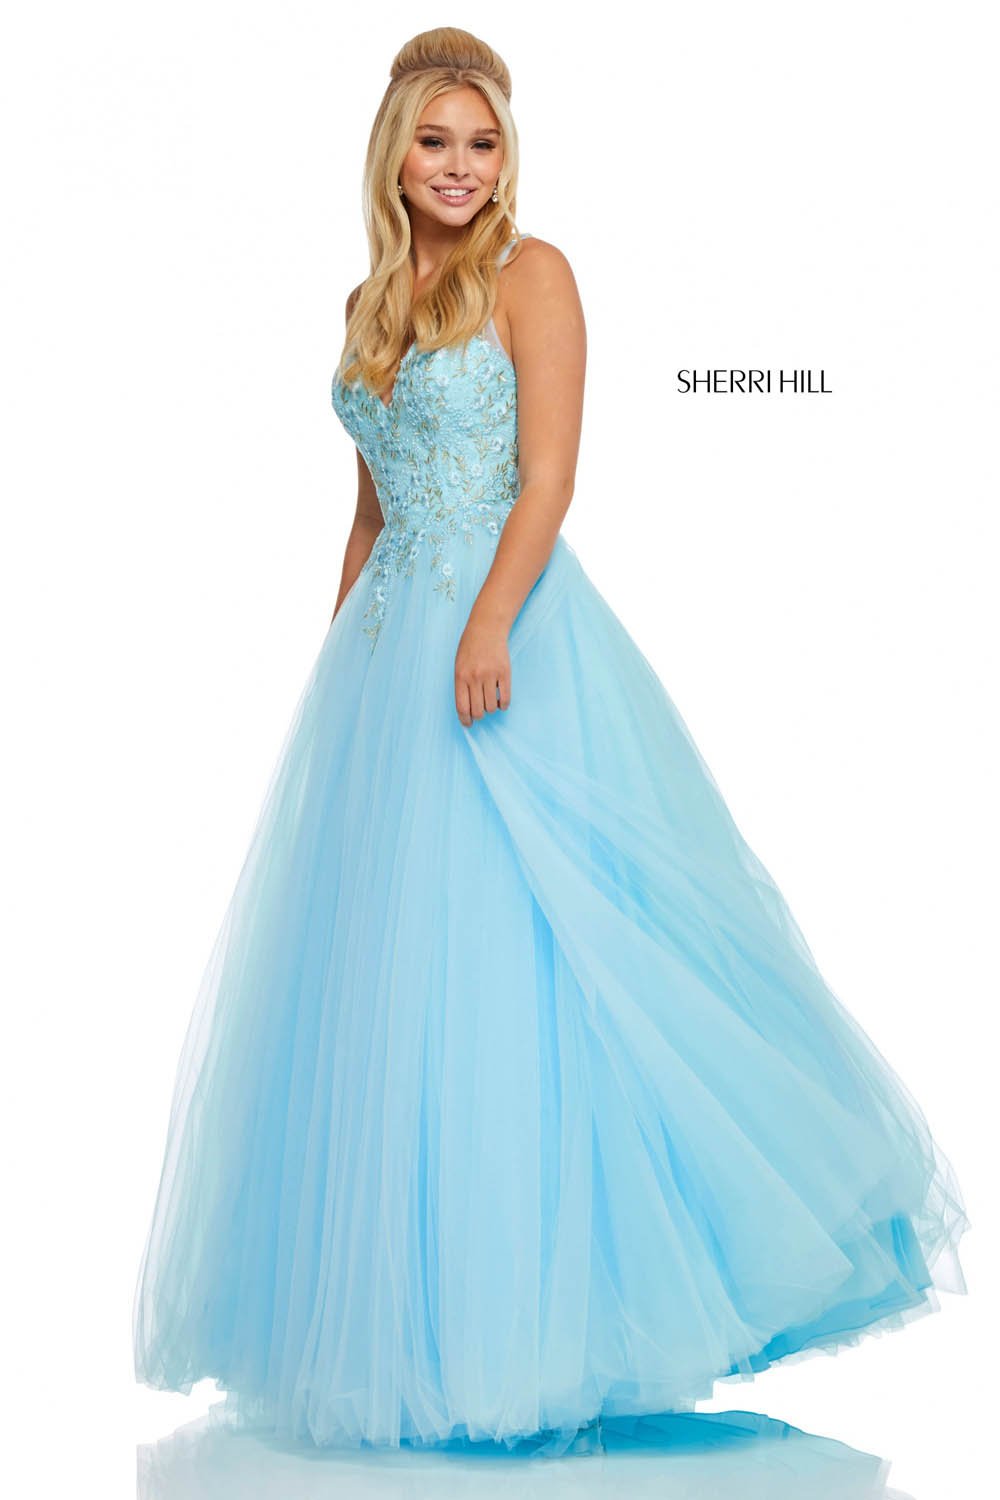 Sherri Hill 52738 dress images in these colors: Light Blue, Yellow, Pink.